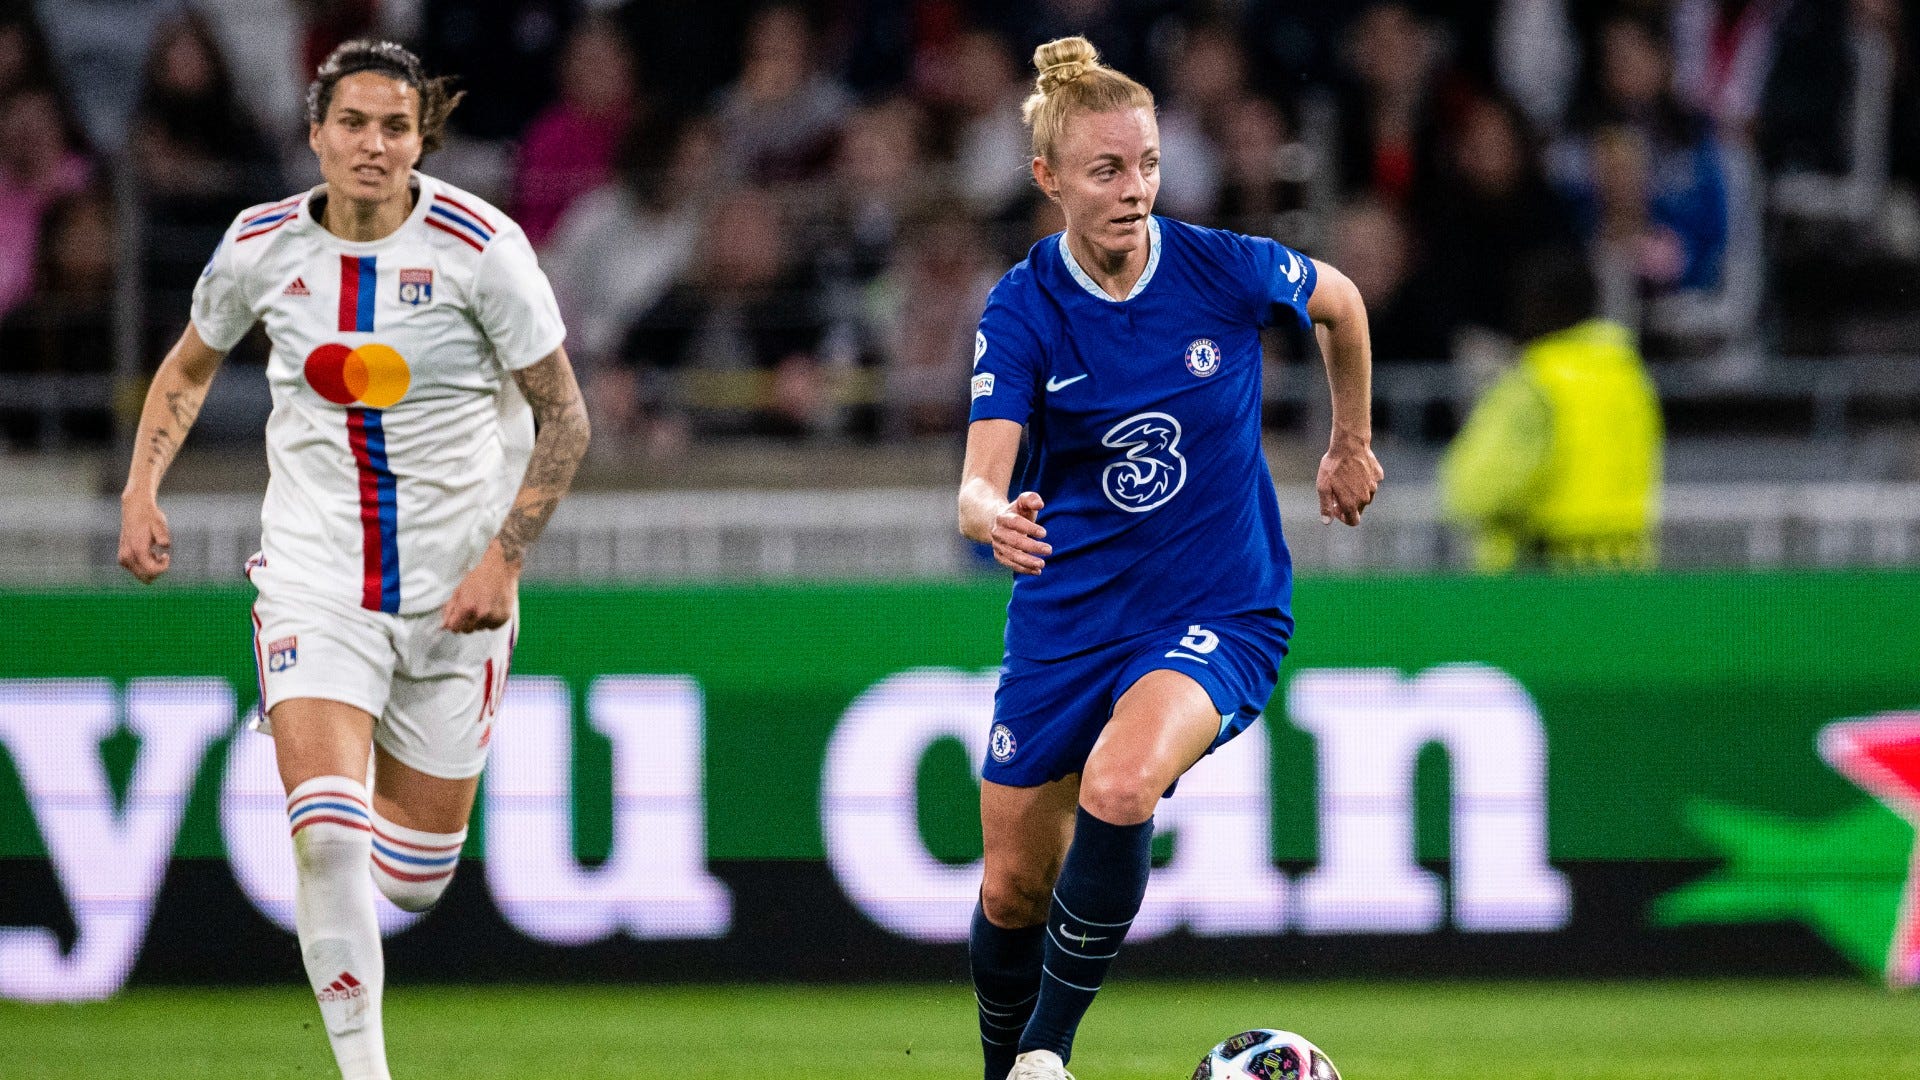 Chelsea Women vs Lyon Women Where to watch the match online, live stream, TV channels and kick-off time Goal US